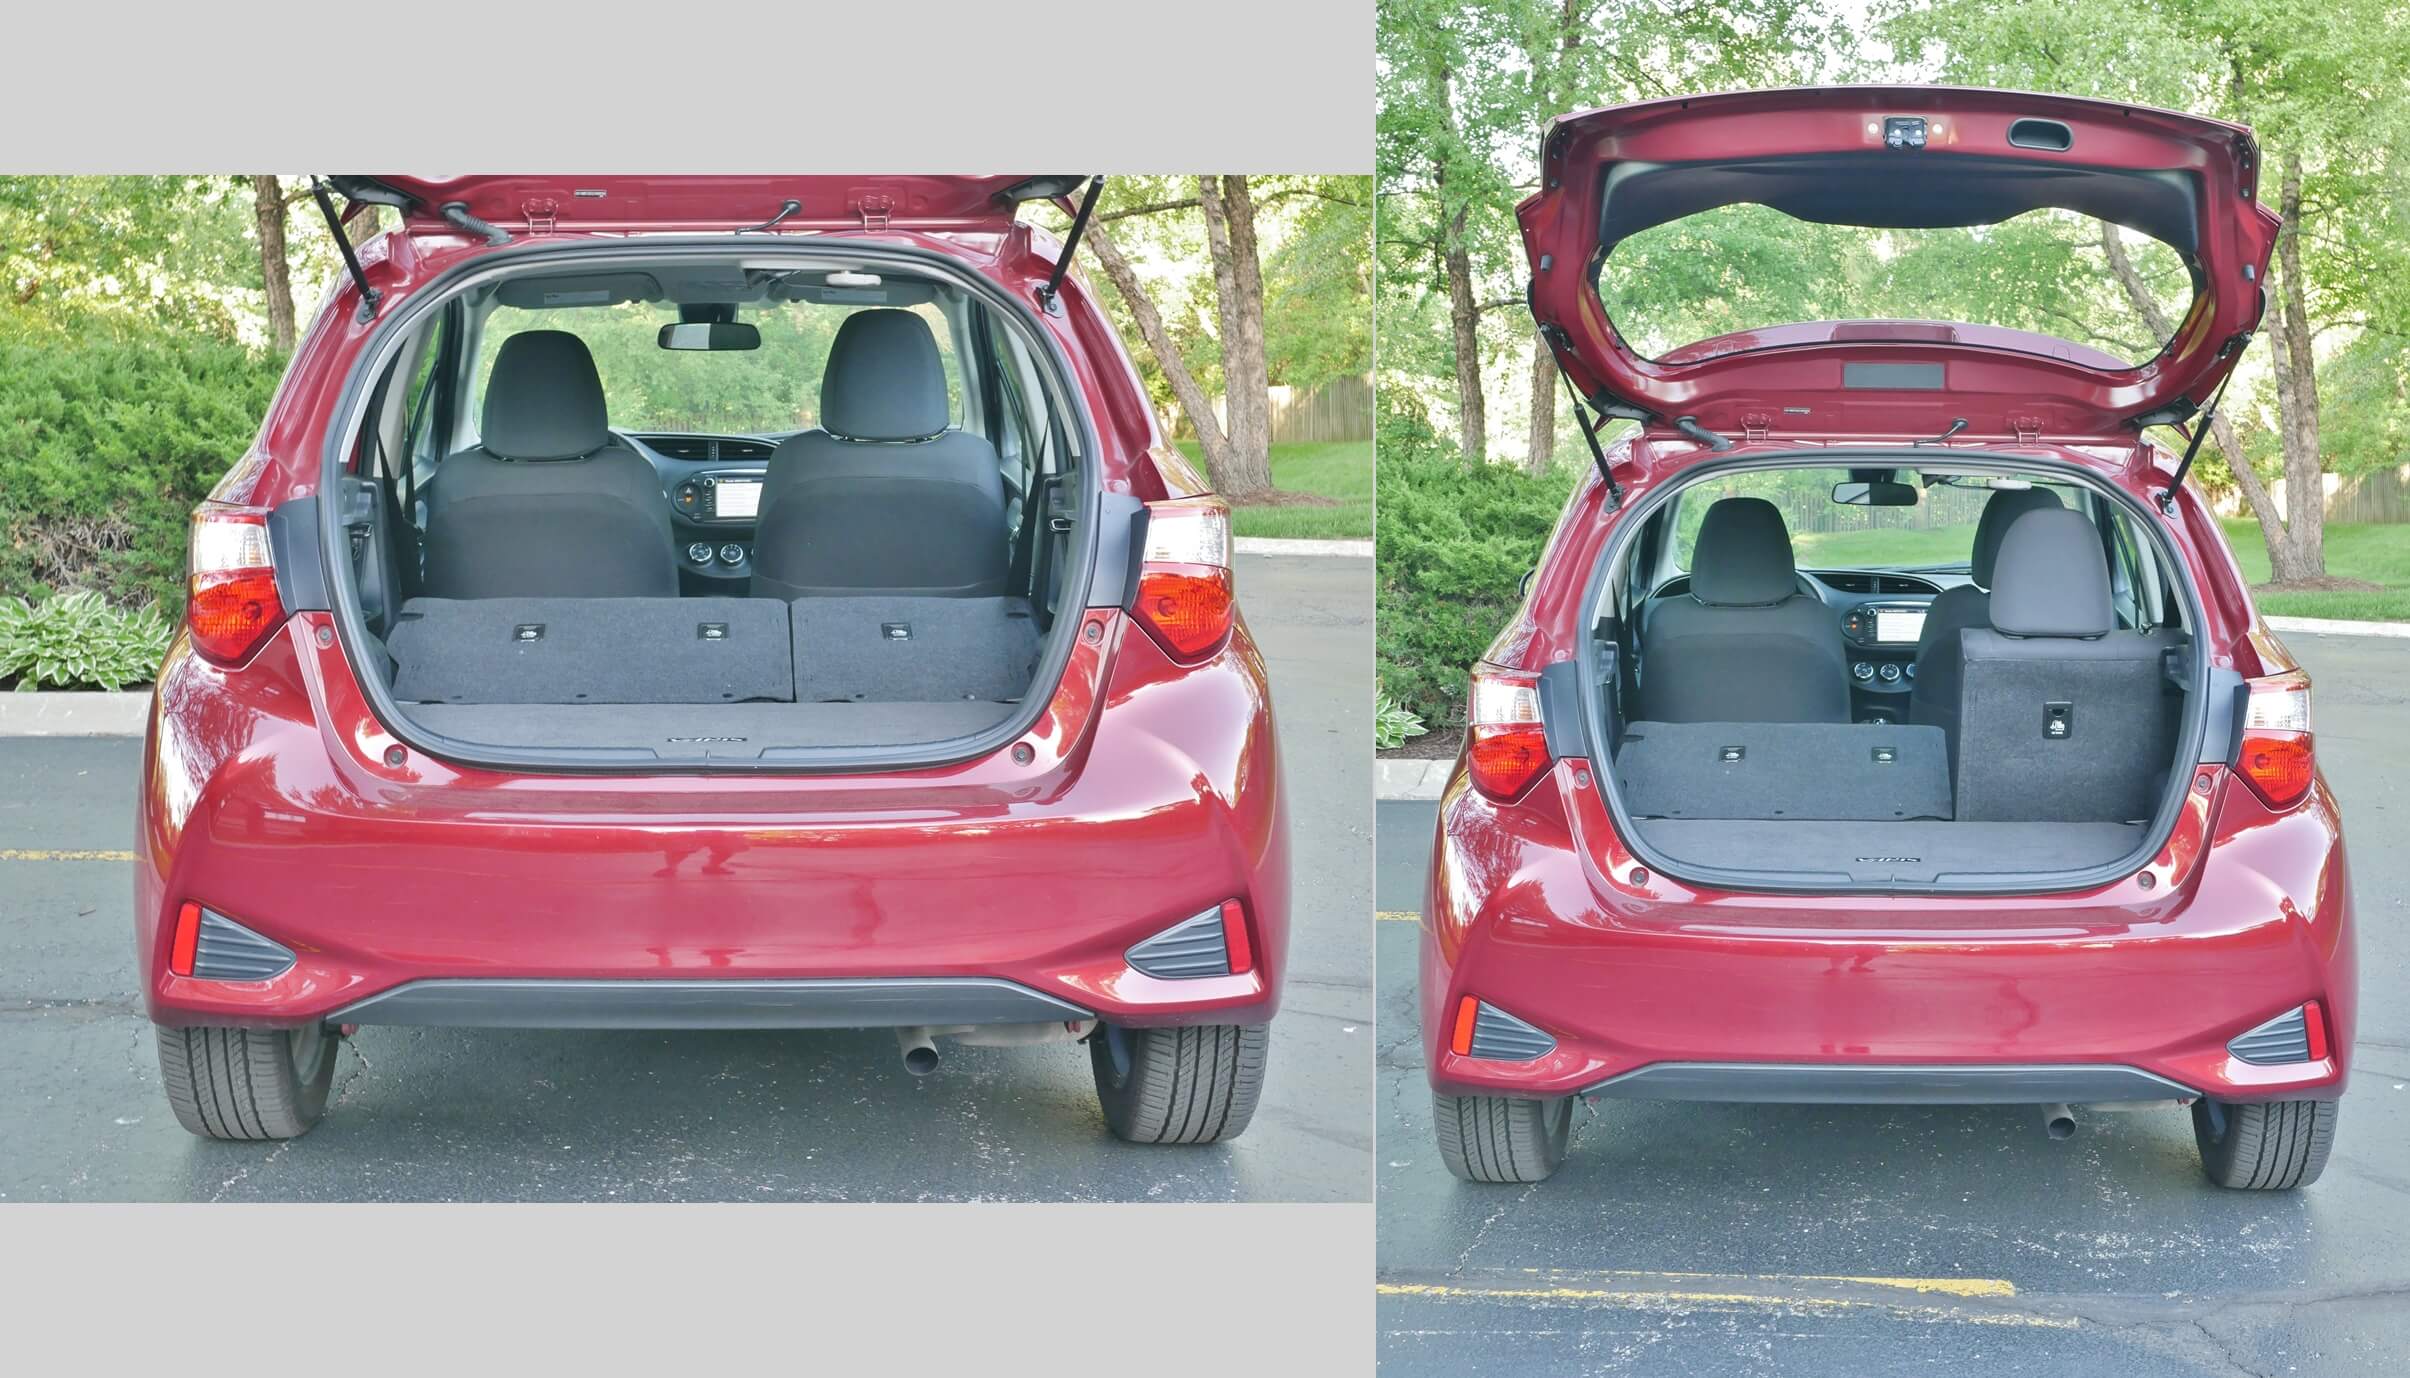 2018 Toyota Yaris 5 Door SE: among the lower load liftovers and easiest to reach open liftgates, with cargo space just under par for segment